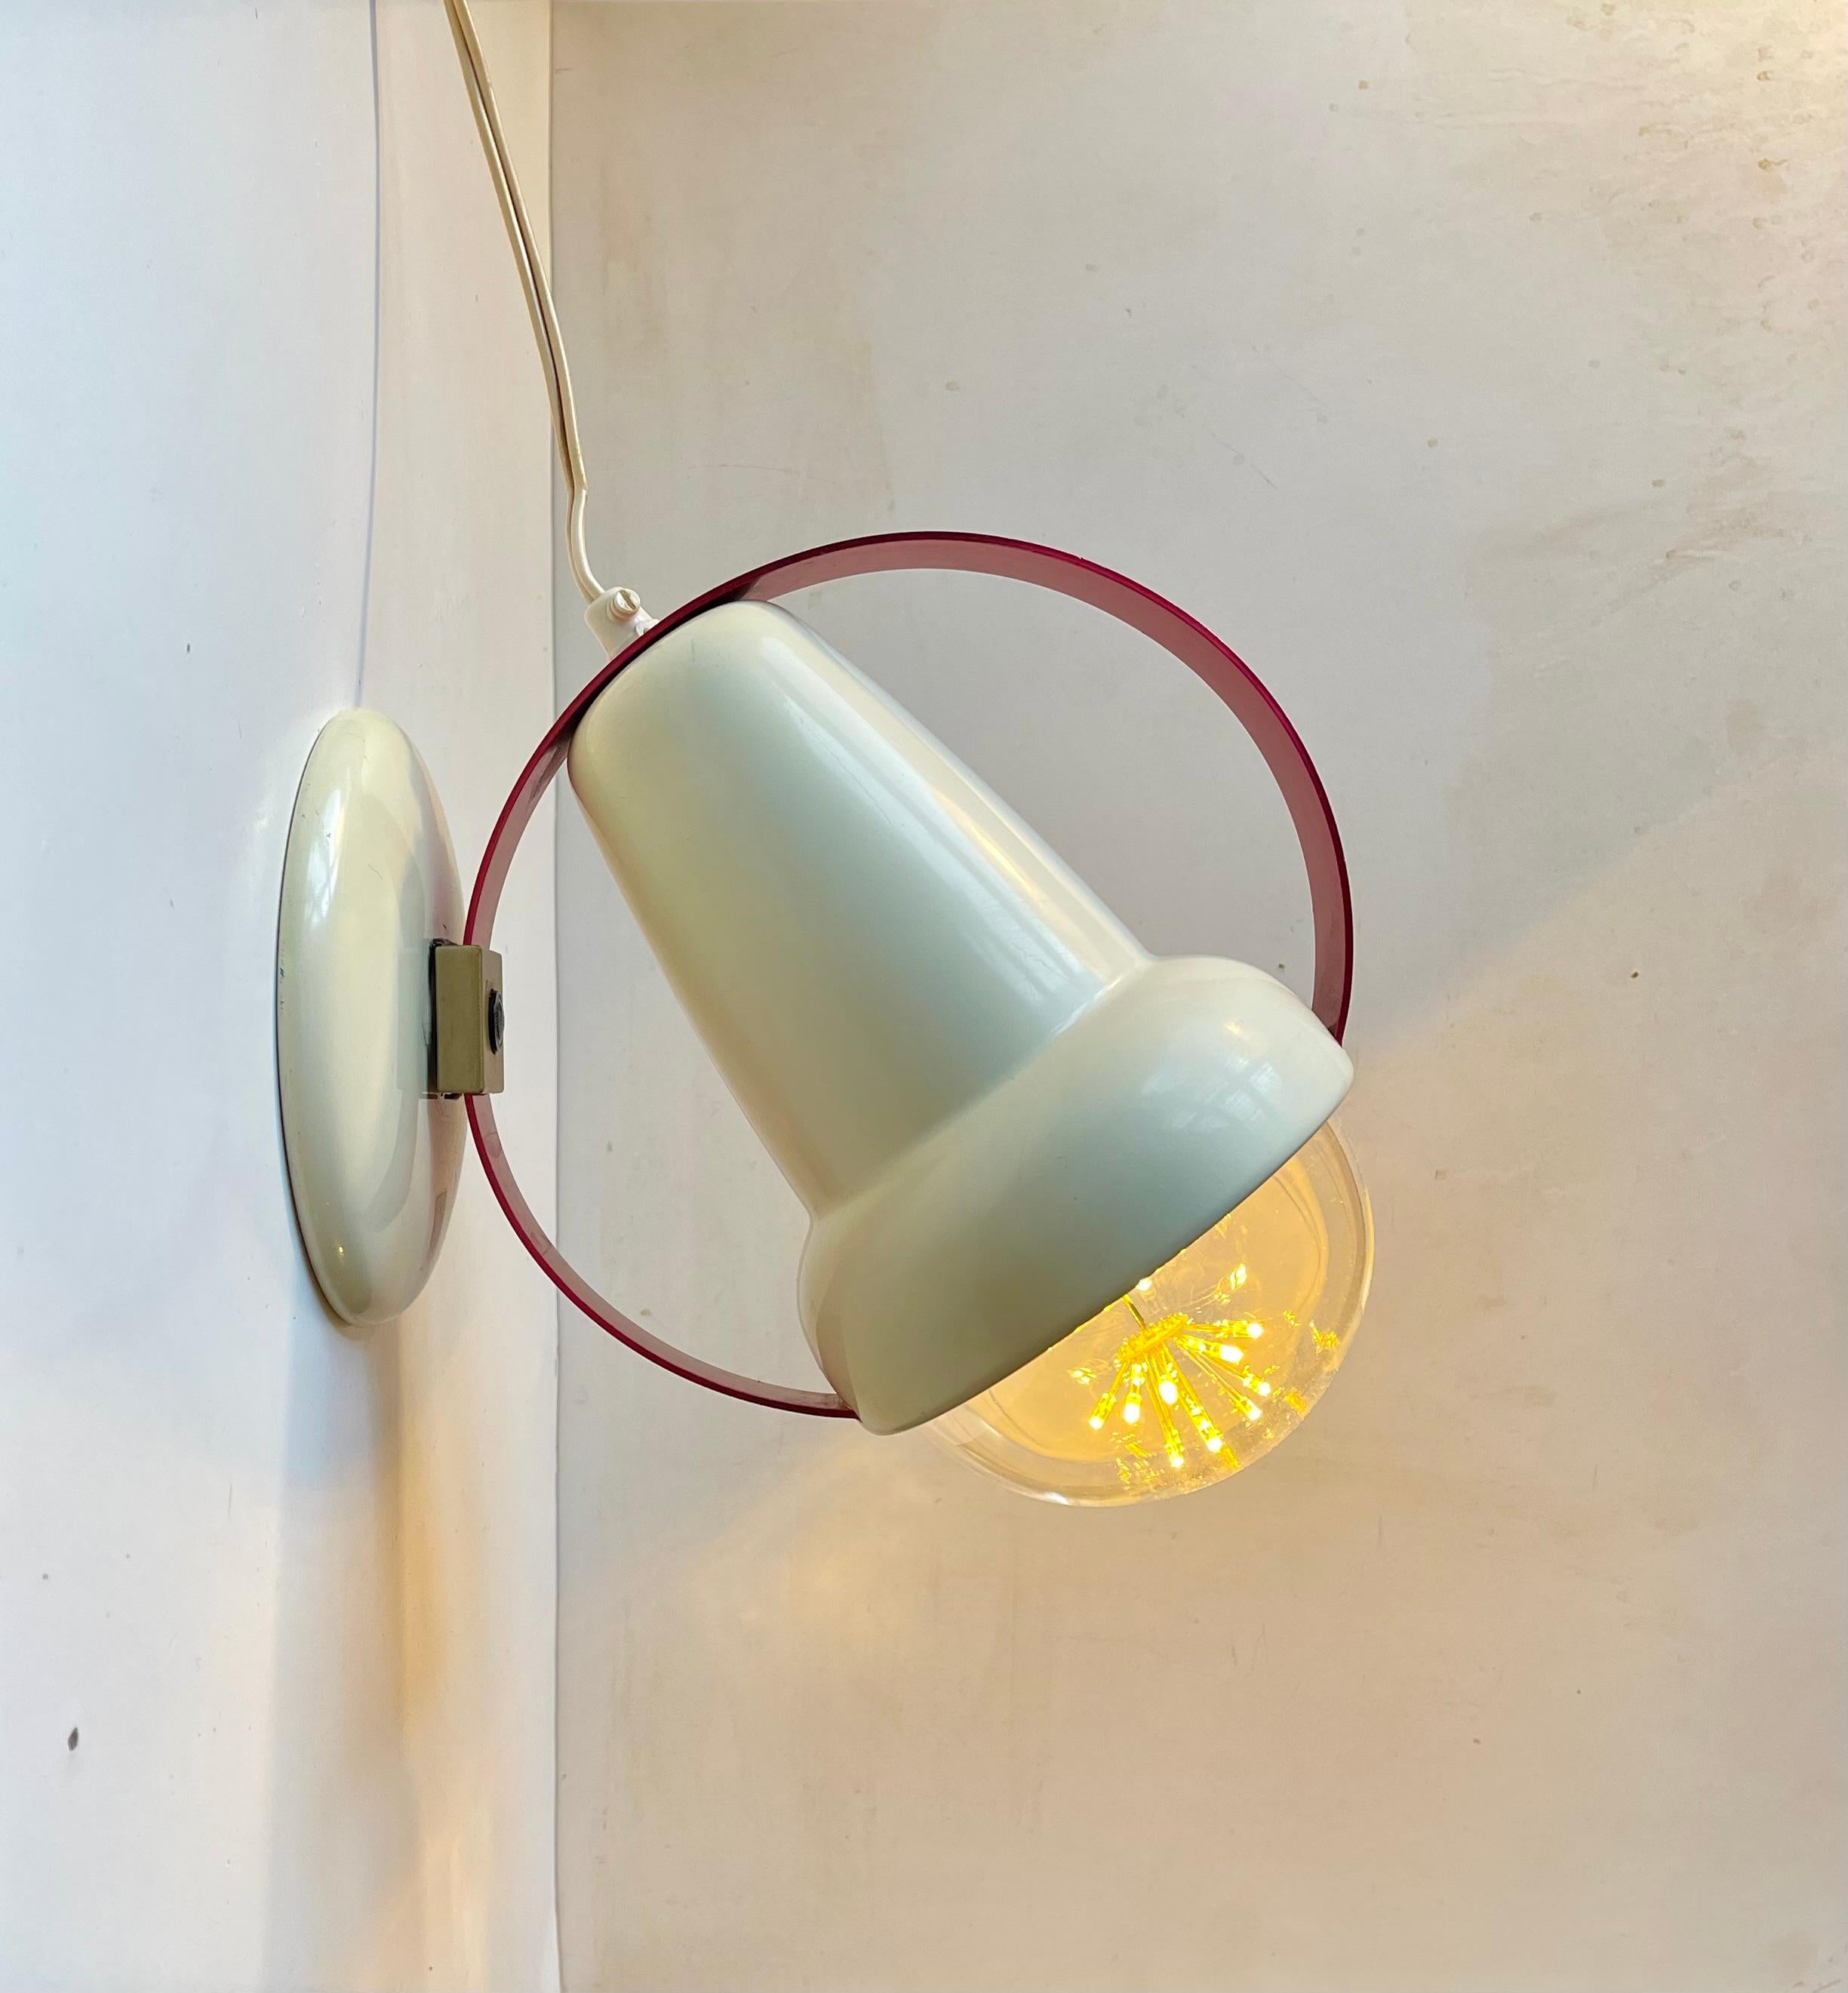 A pair of original Charlotte Perriand sun-lamps (Type 7529) up-cycled to wall or table lamp by our in-house electrician. Everything is original besides the sockets and new maxi-bulbs. They even retain their original cords/wire. The direction of the